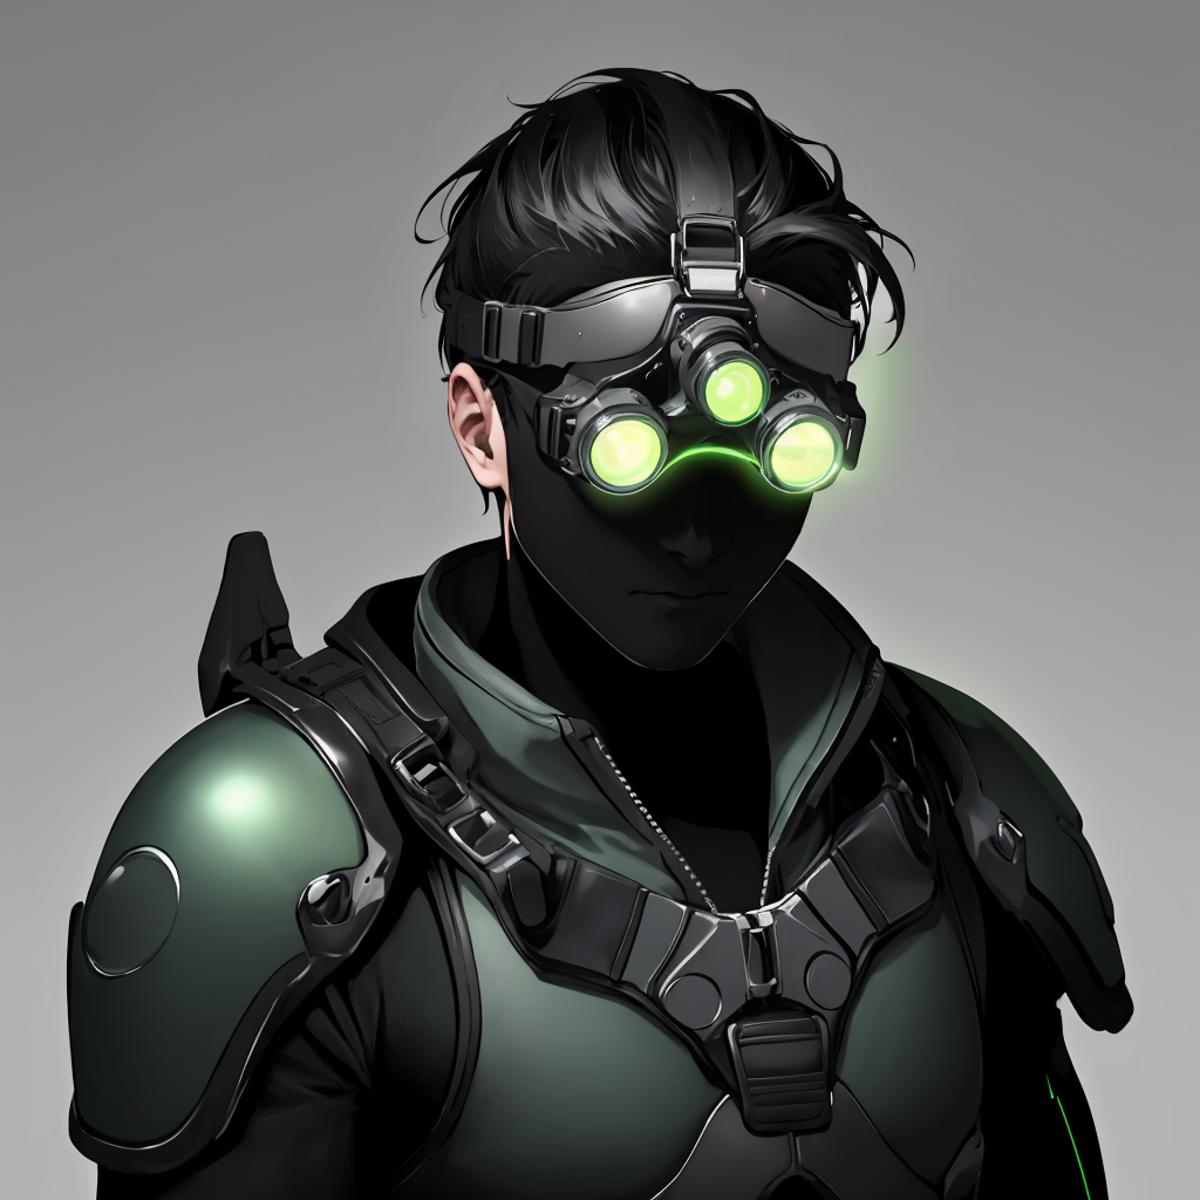 Night vision goggles - splinter cell image by Lembont